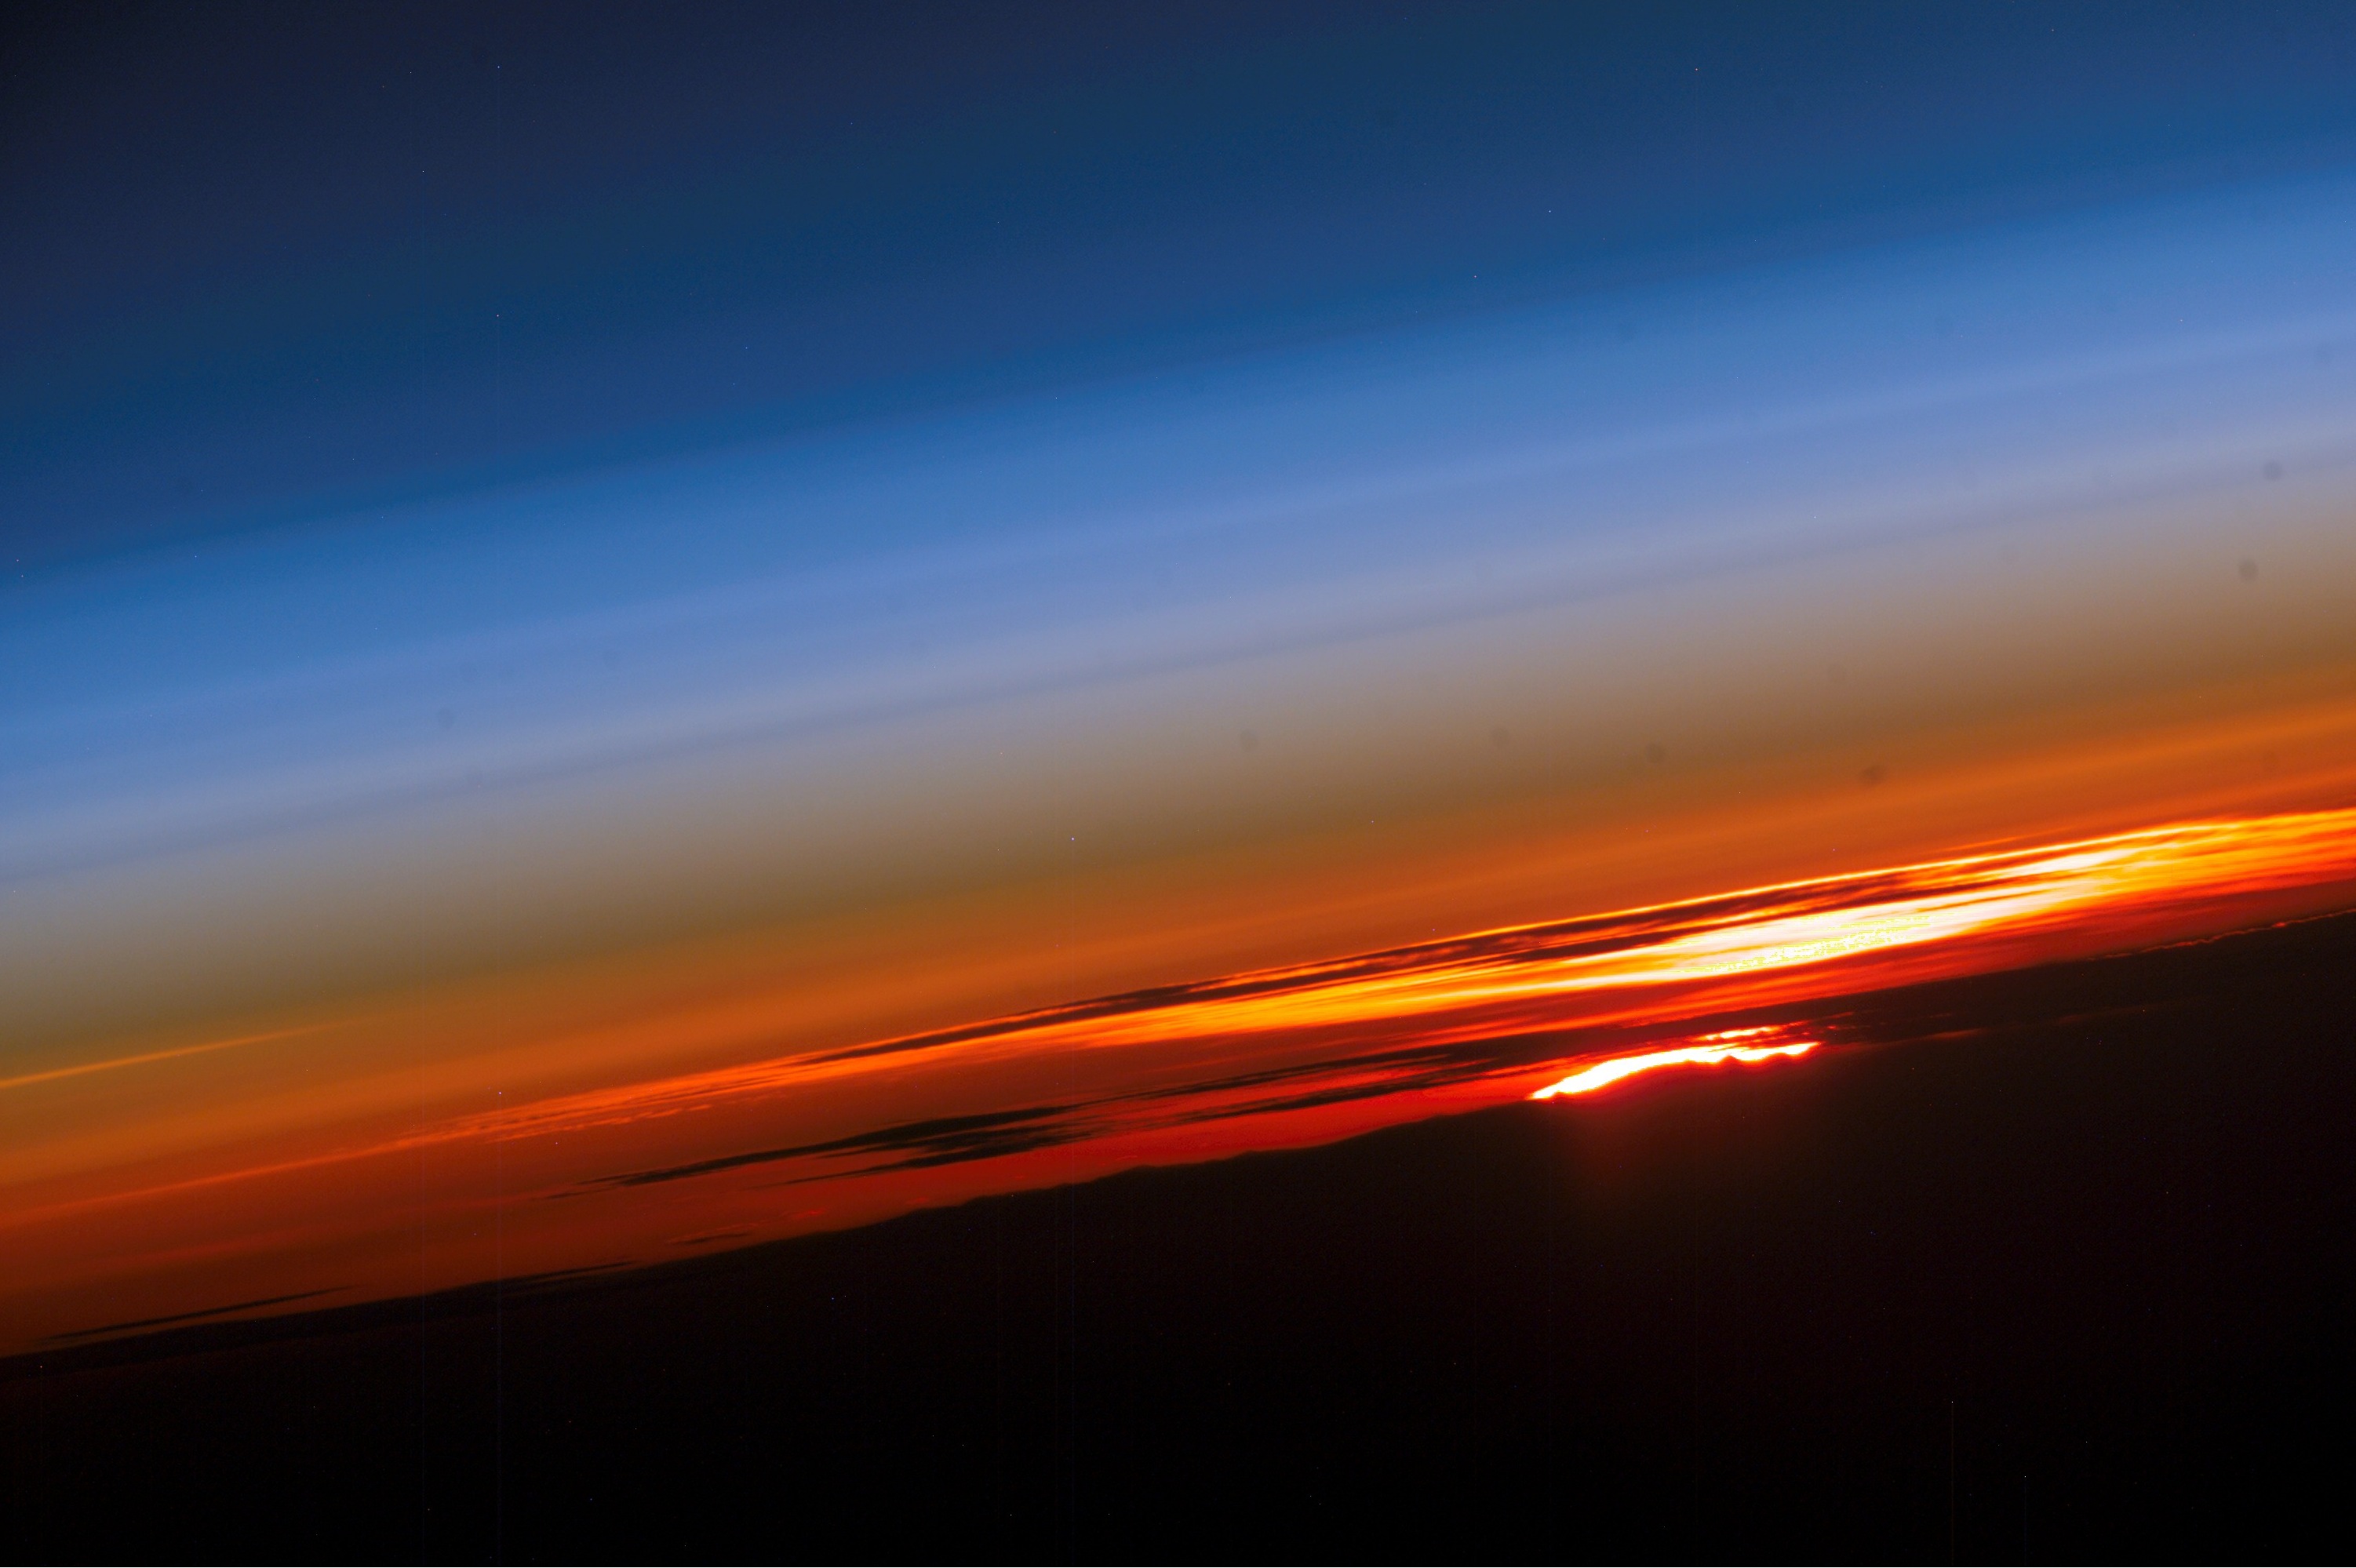 Sunset from Internation space station